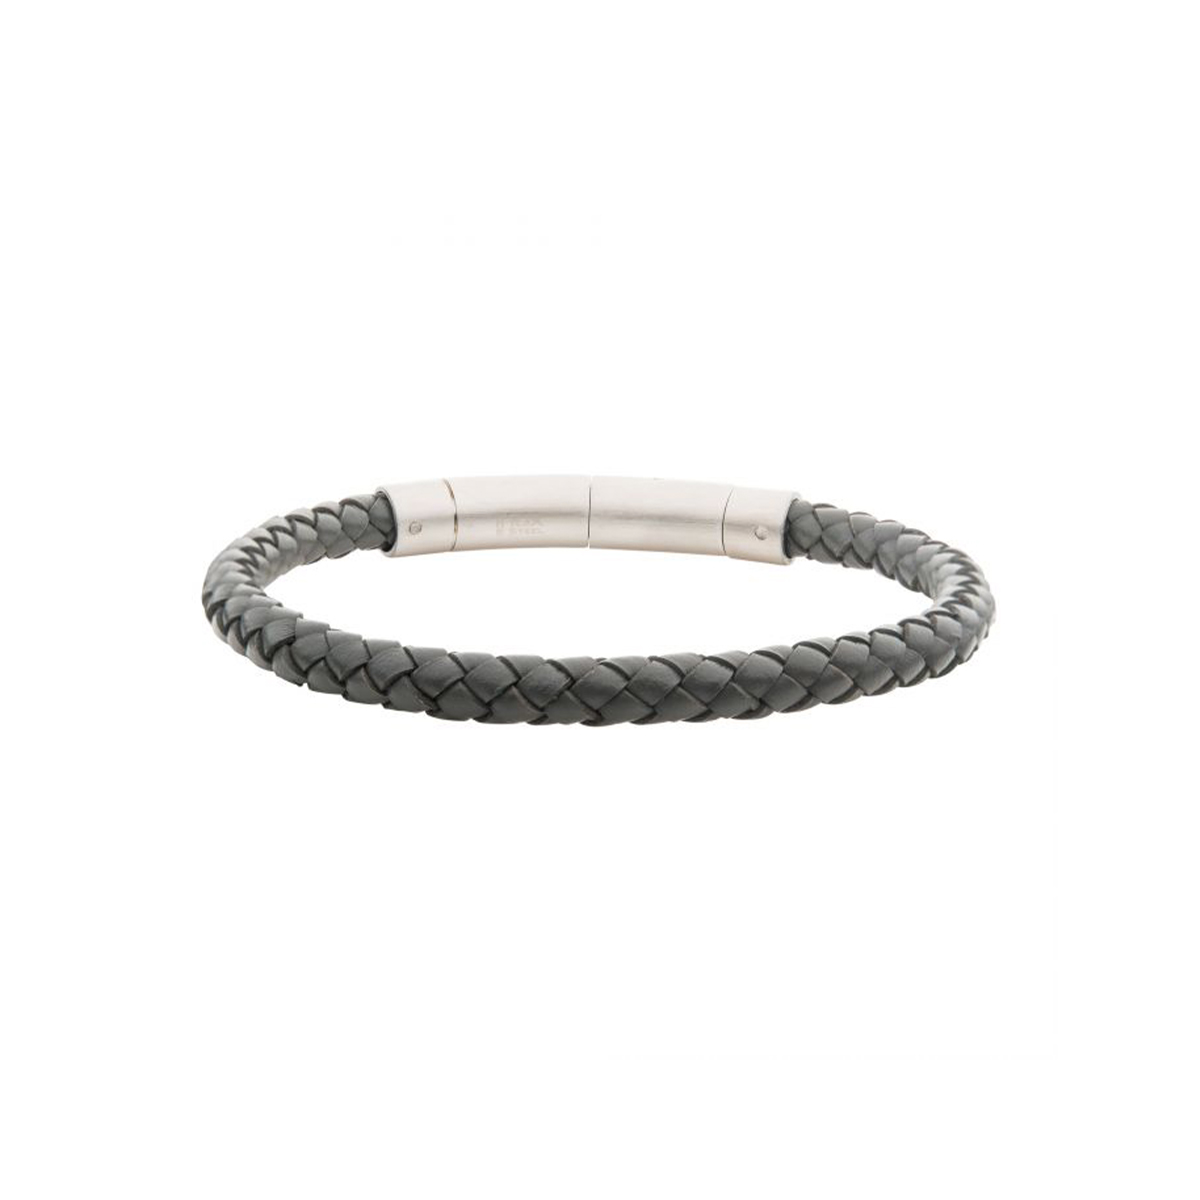 Stainless Steel and Gray Leather Bracelet